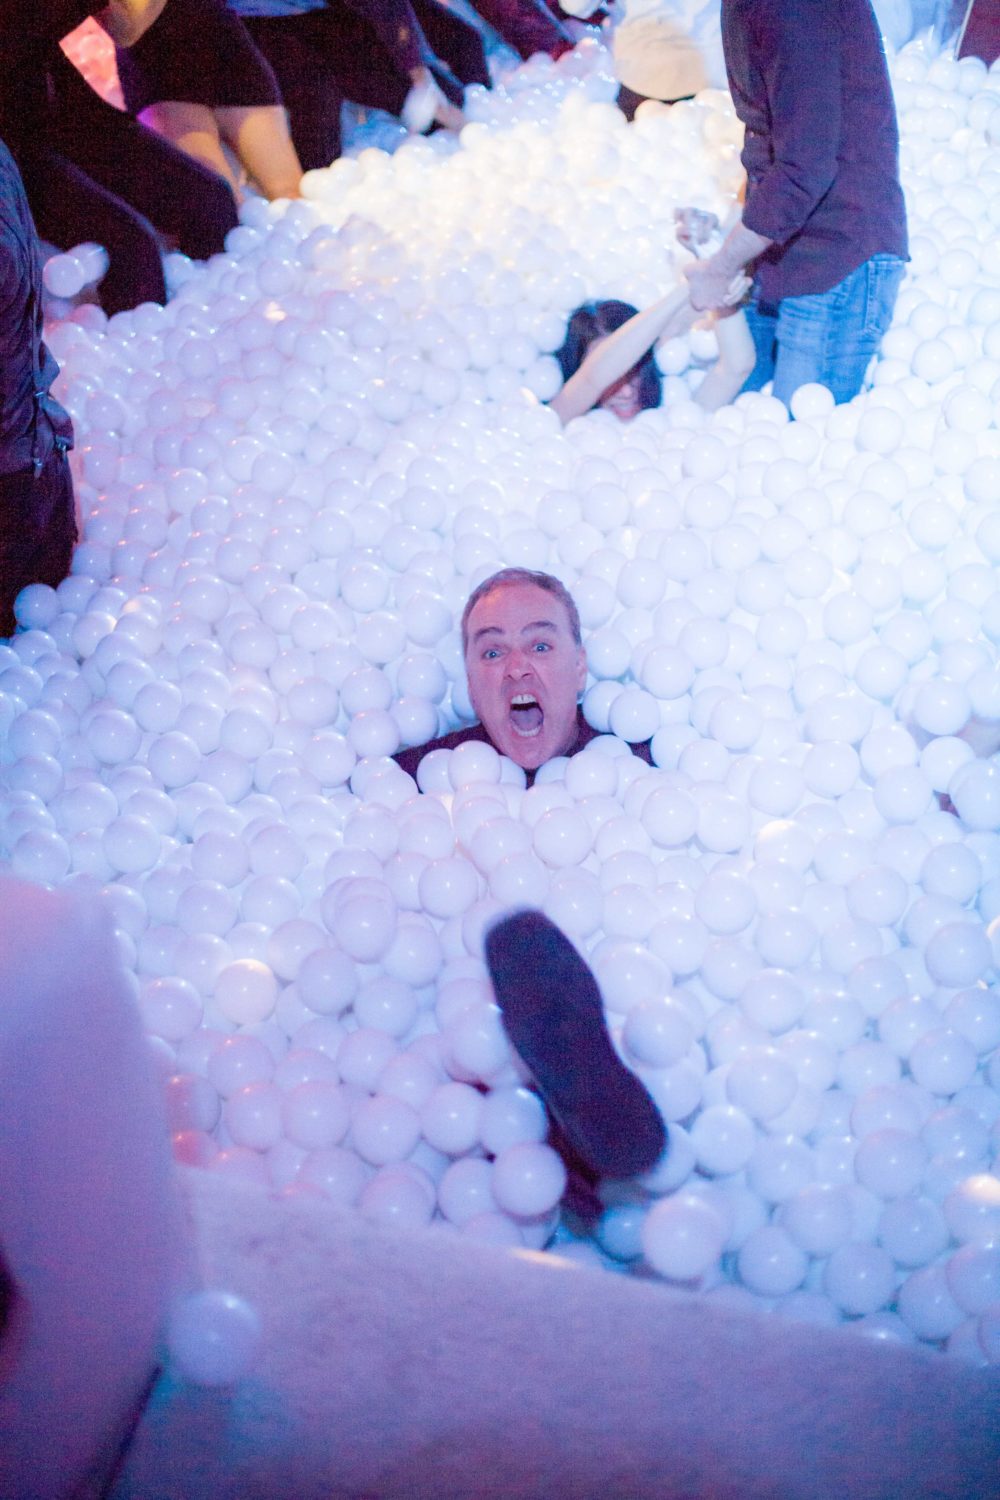 adrian fighting space balls in the spacex ball pit 591299